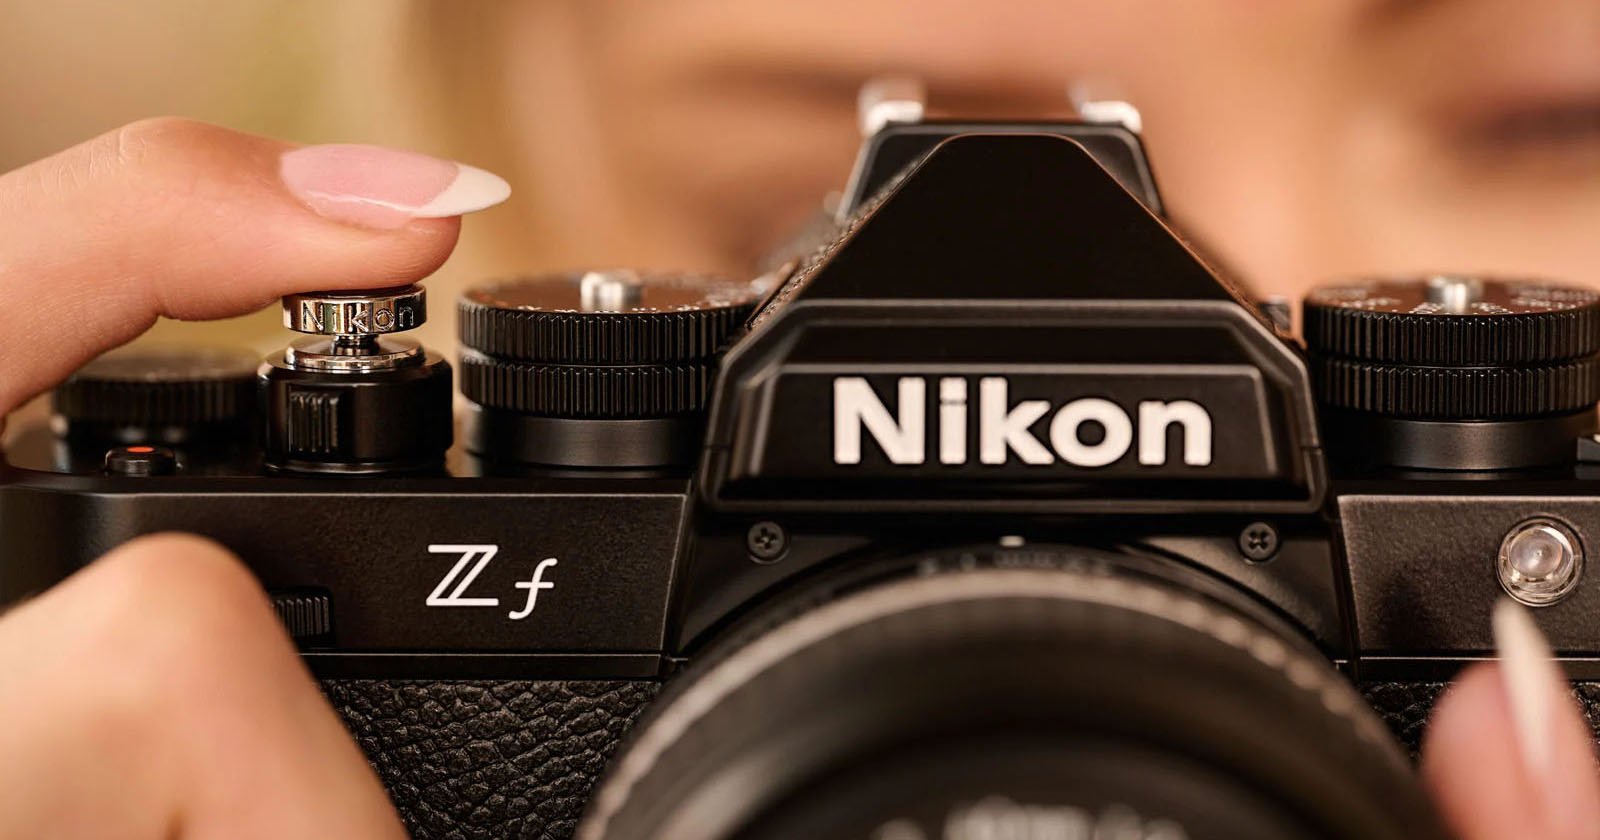 Nikon on User Experience, Camera Controls, and Evolving Preferences